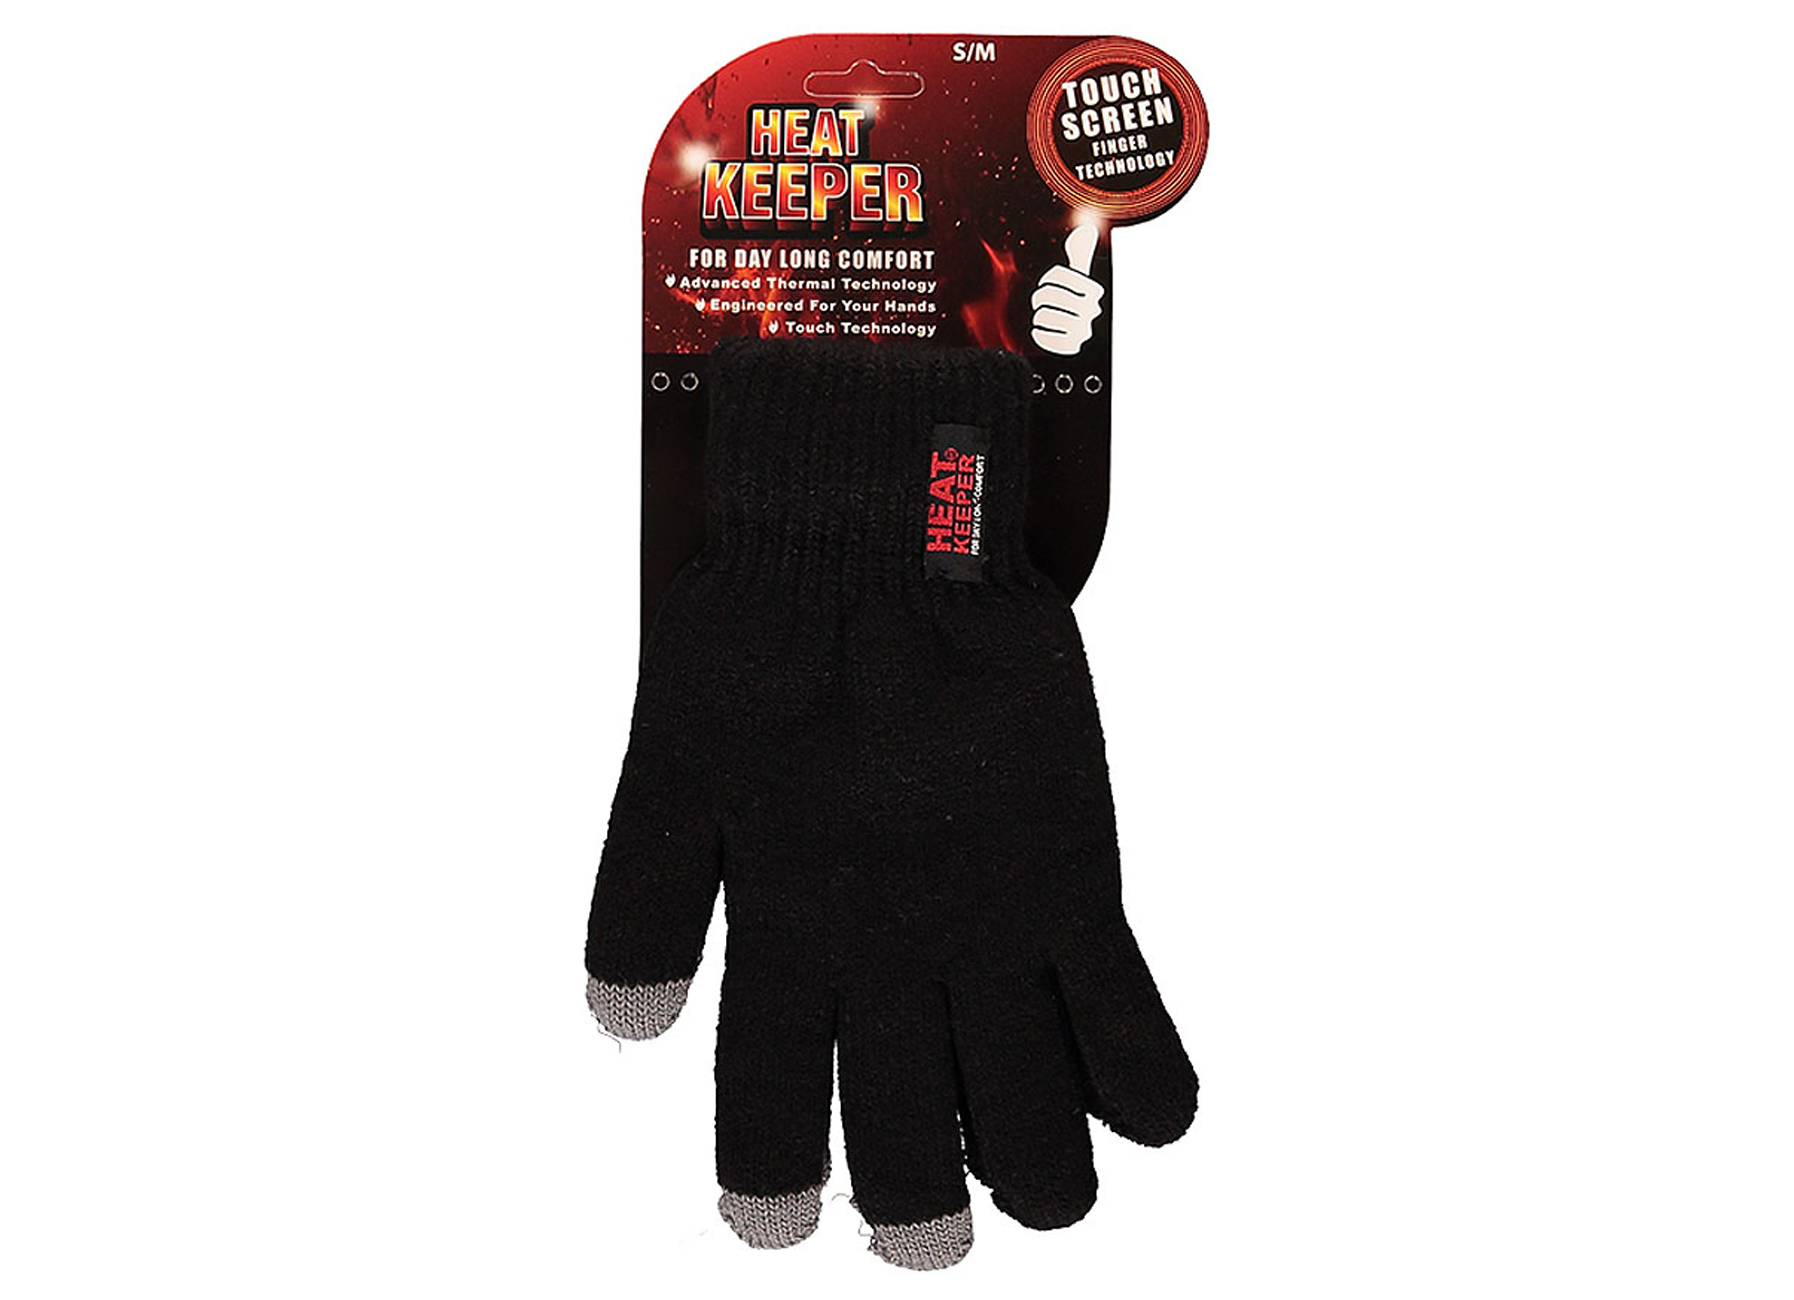 GANTS THERMO HOMMES S/M